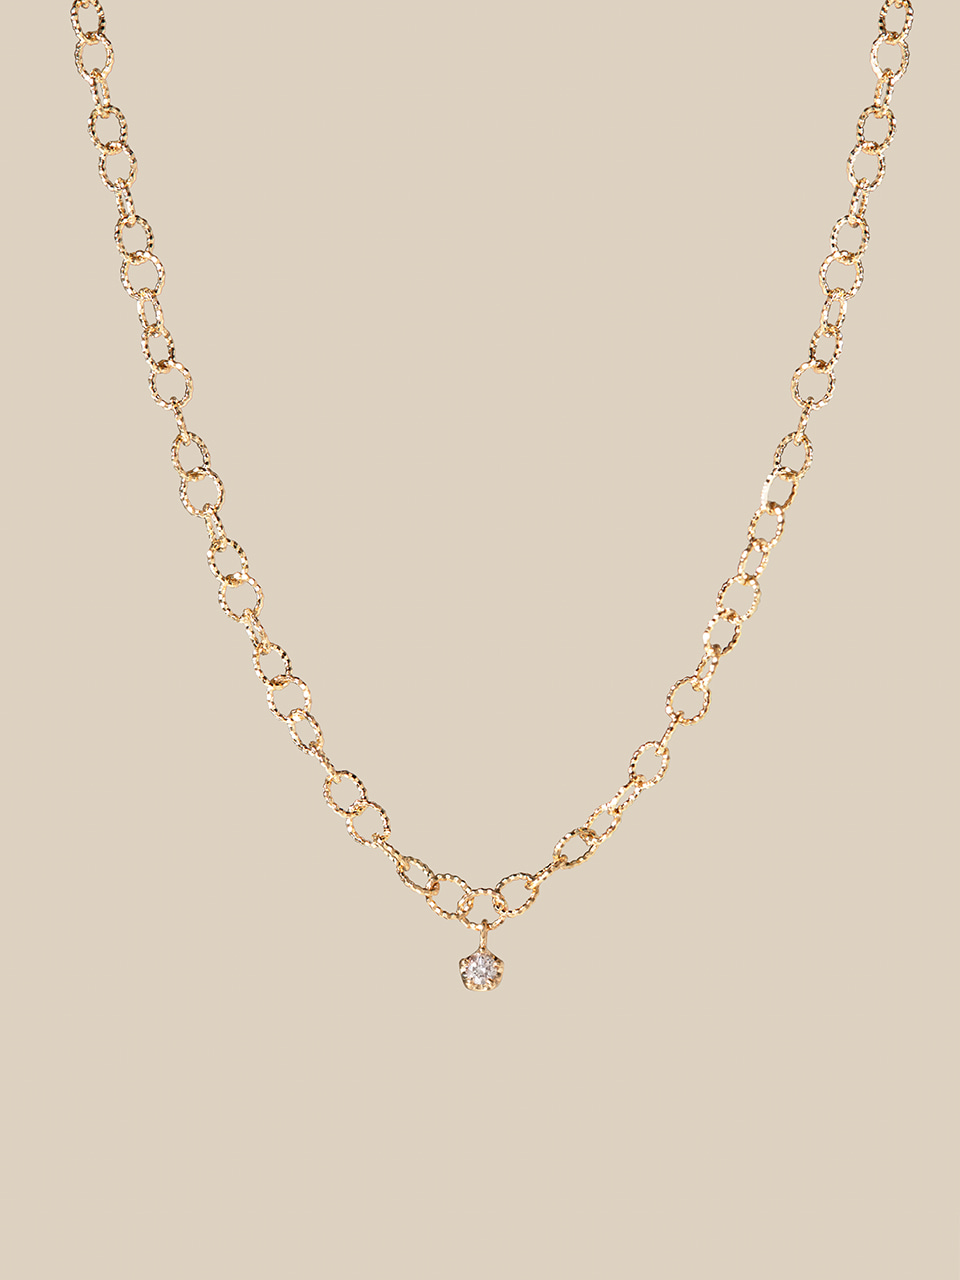 Want Diamond Chain Necklace